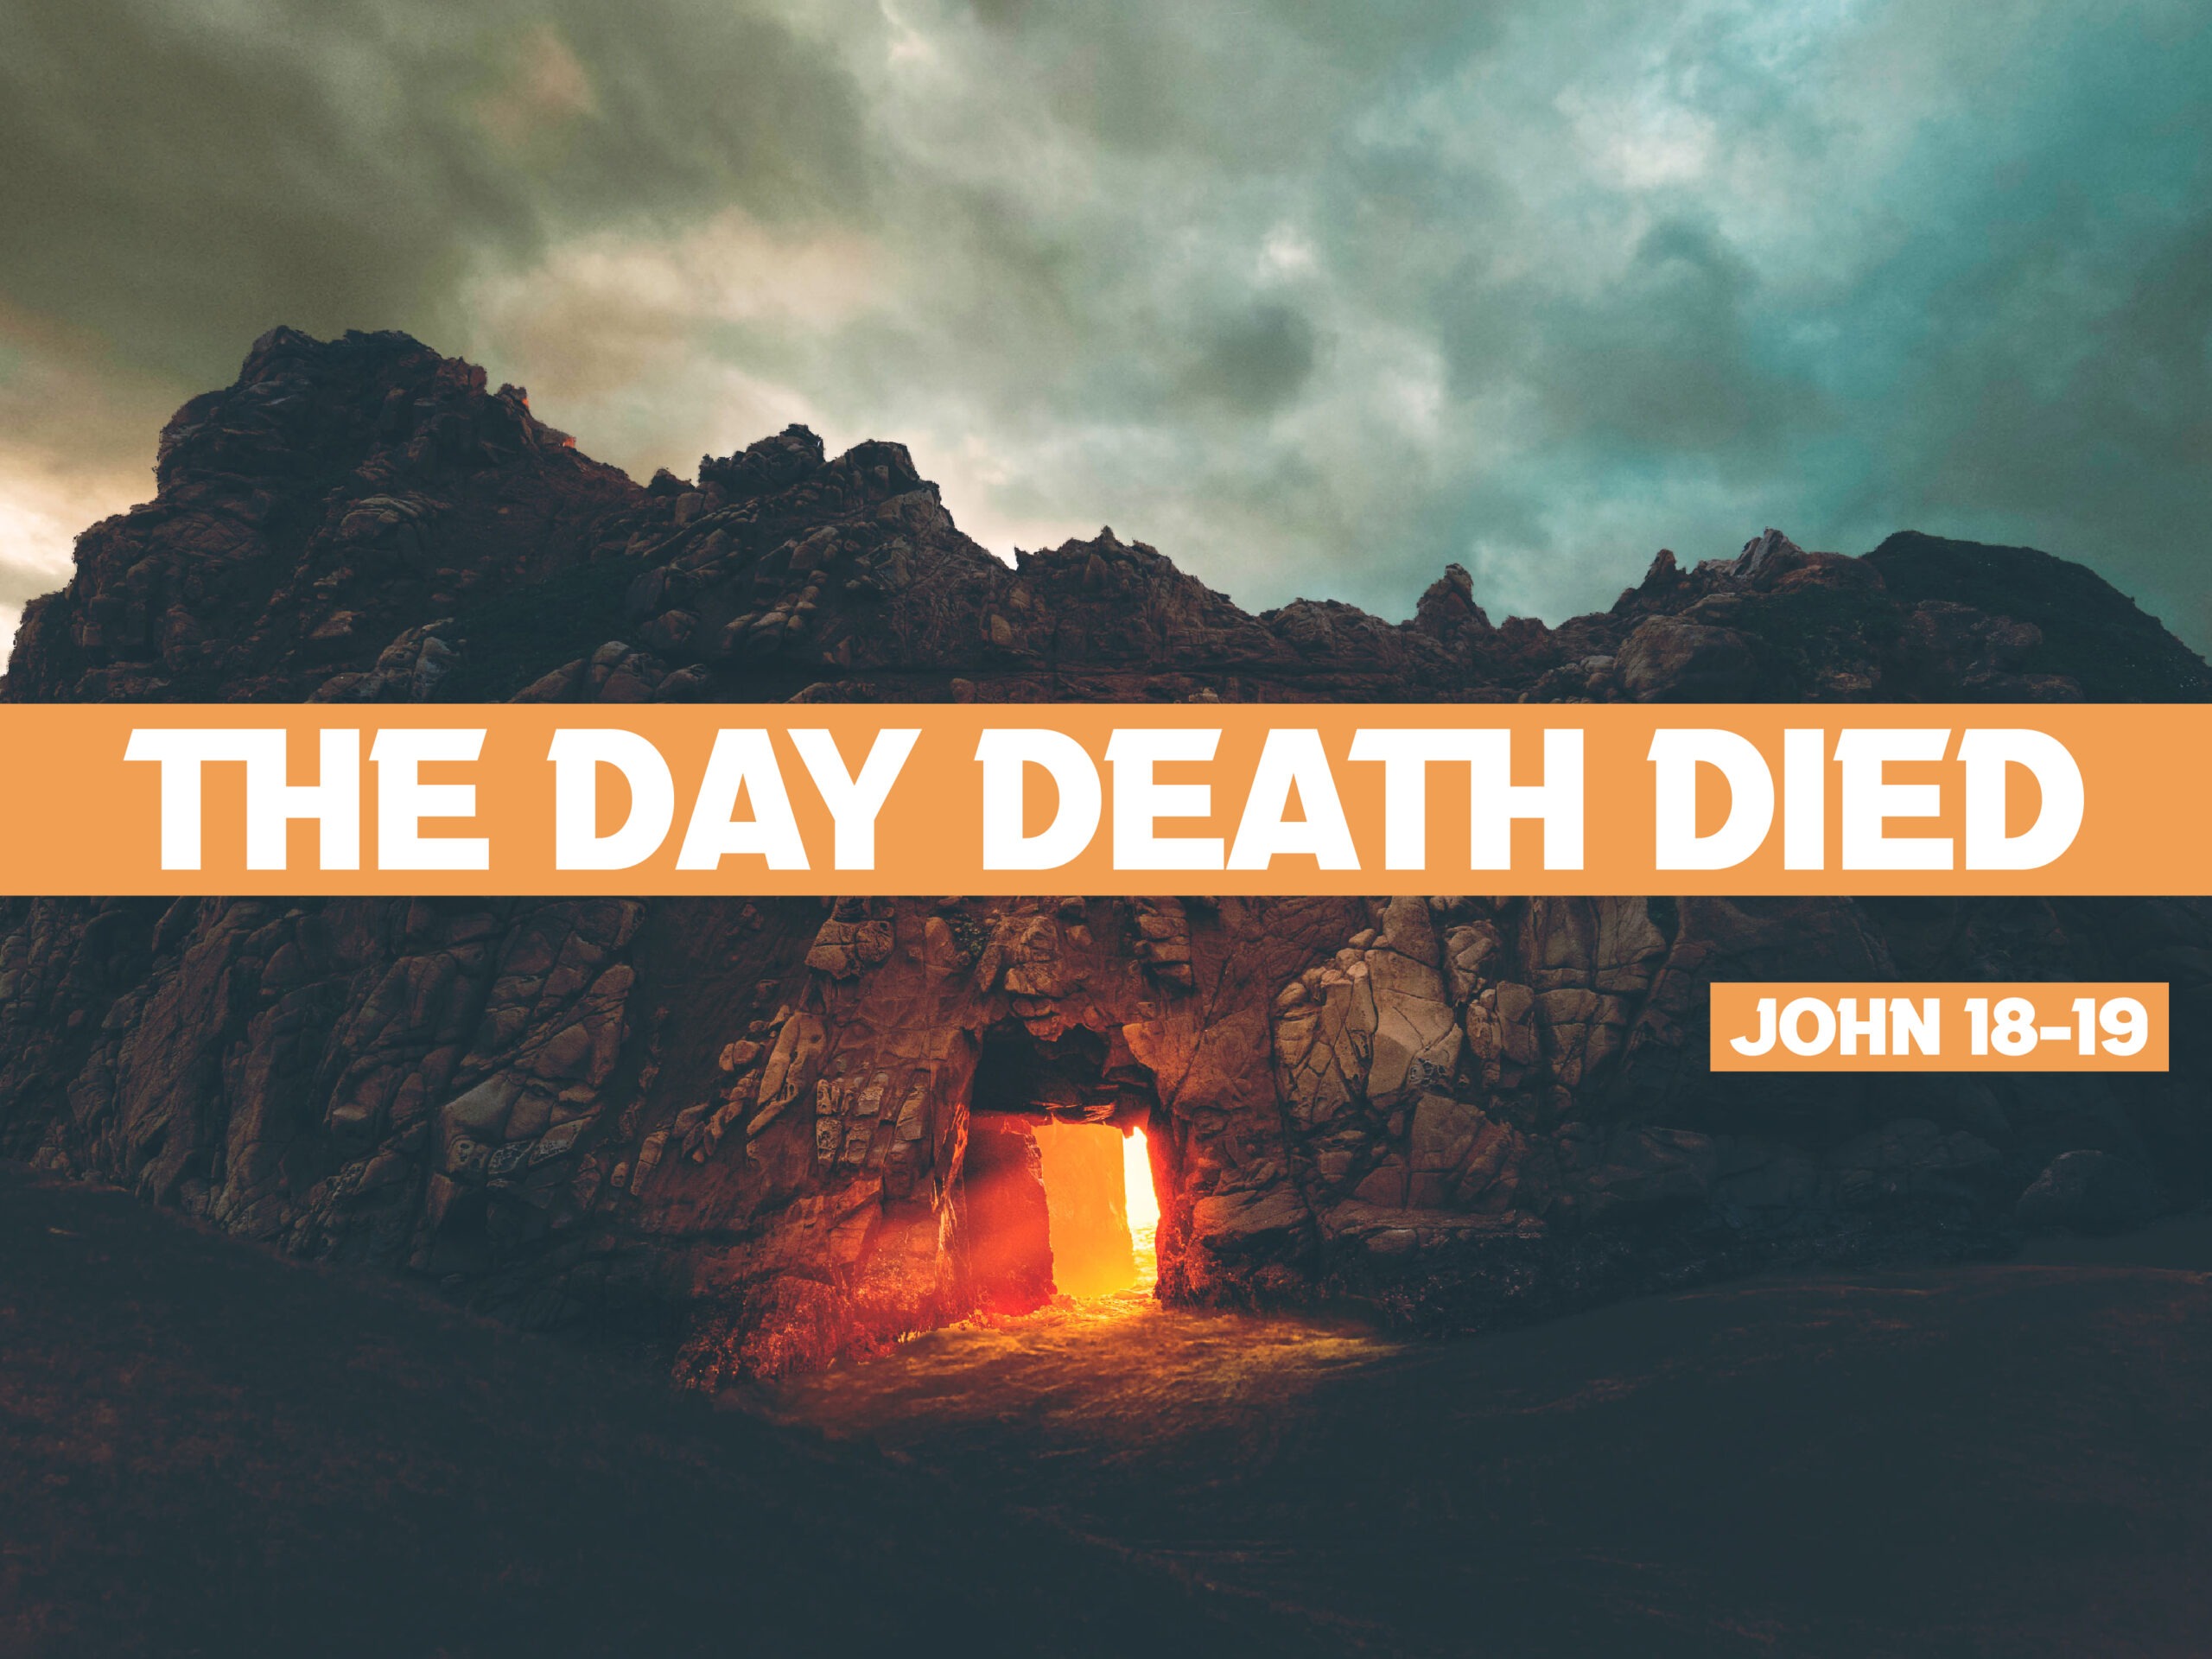 The Day Death Died